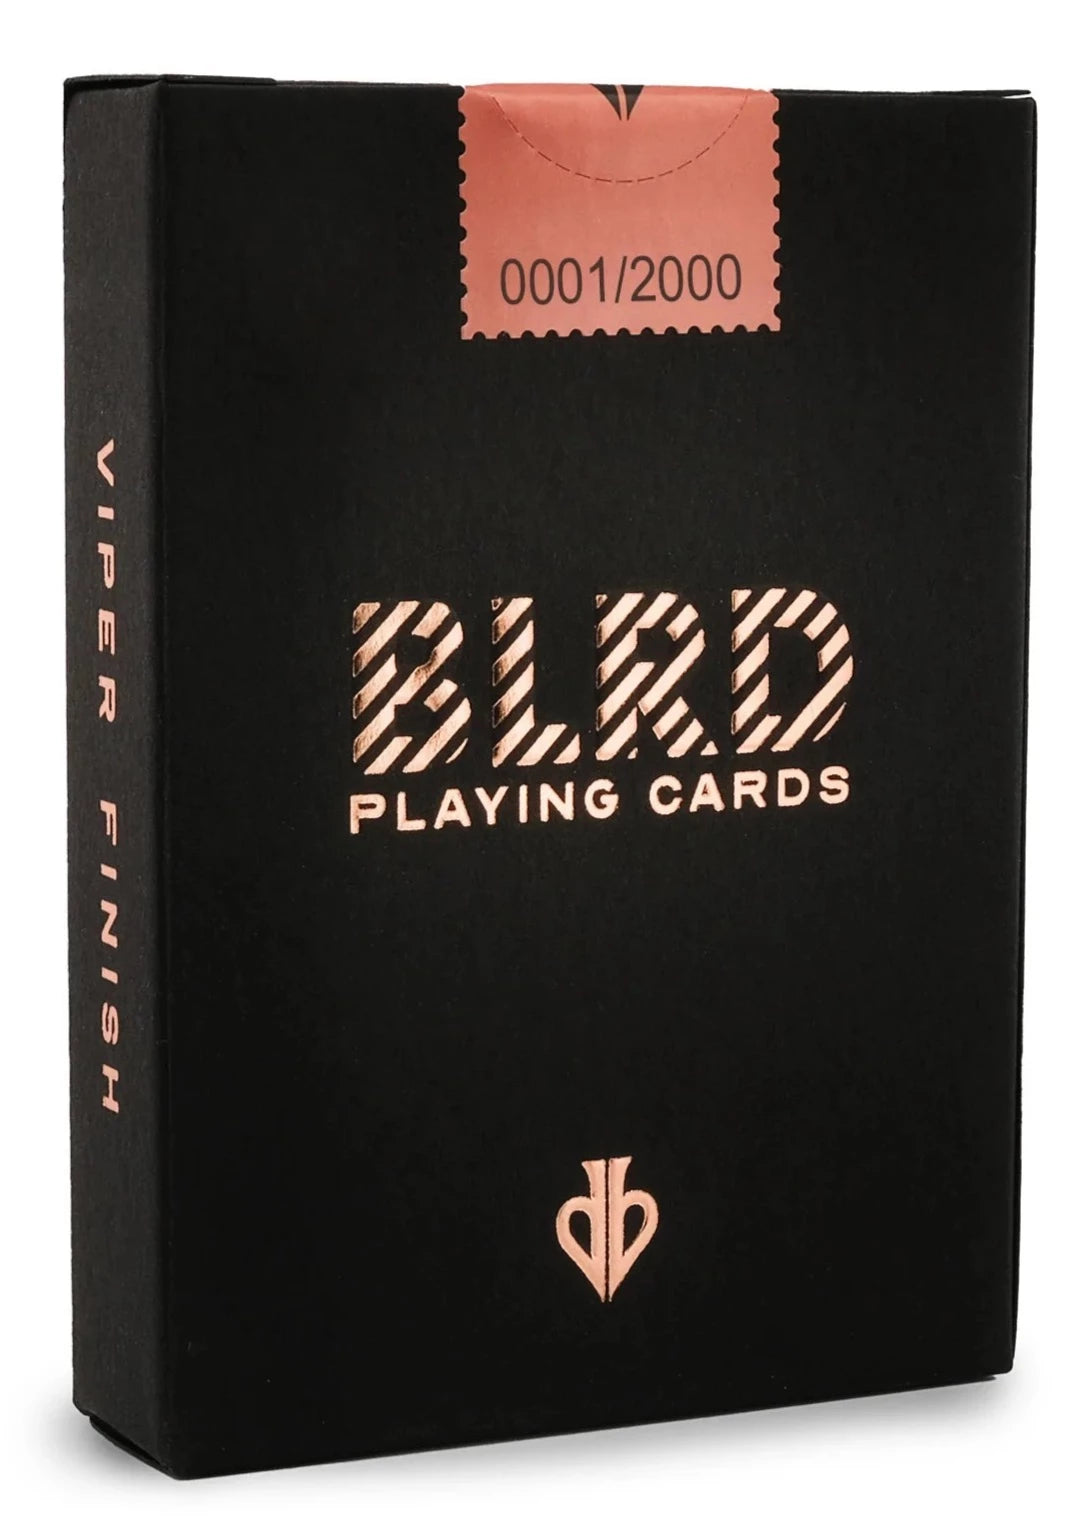 BLRD GOLD EDITION OF 2000